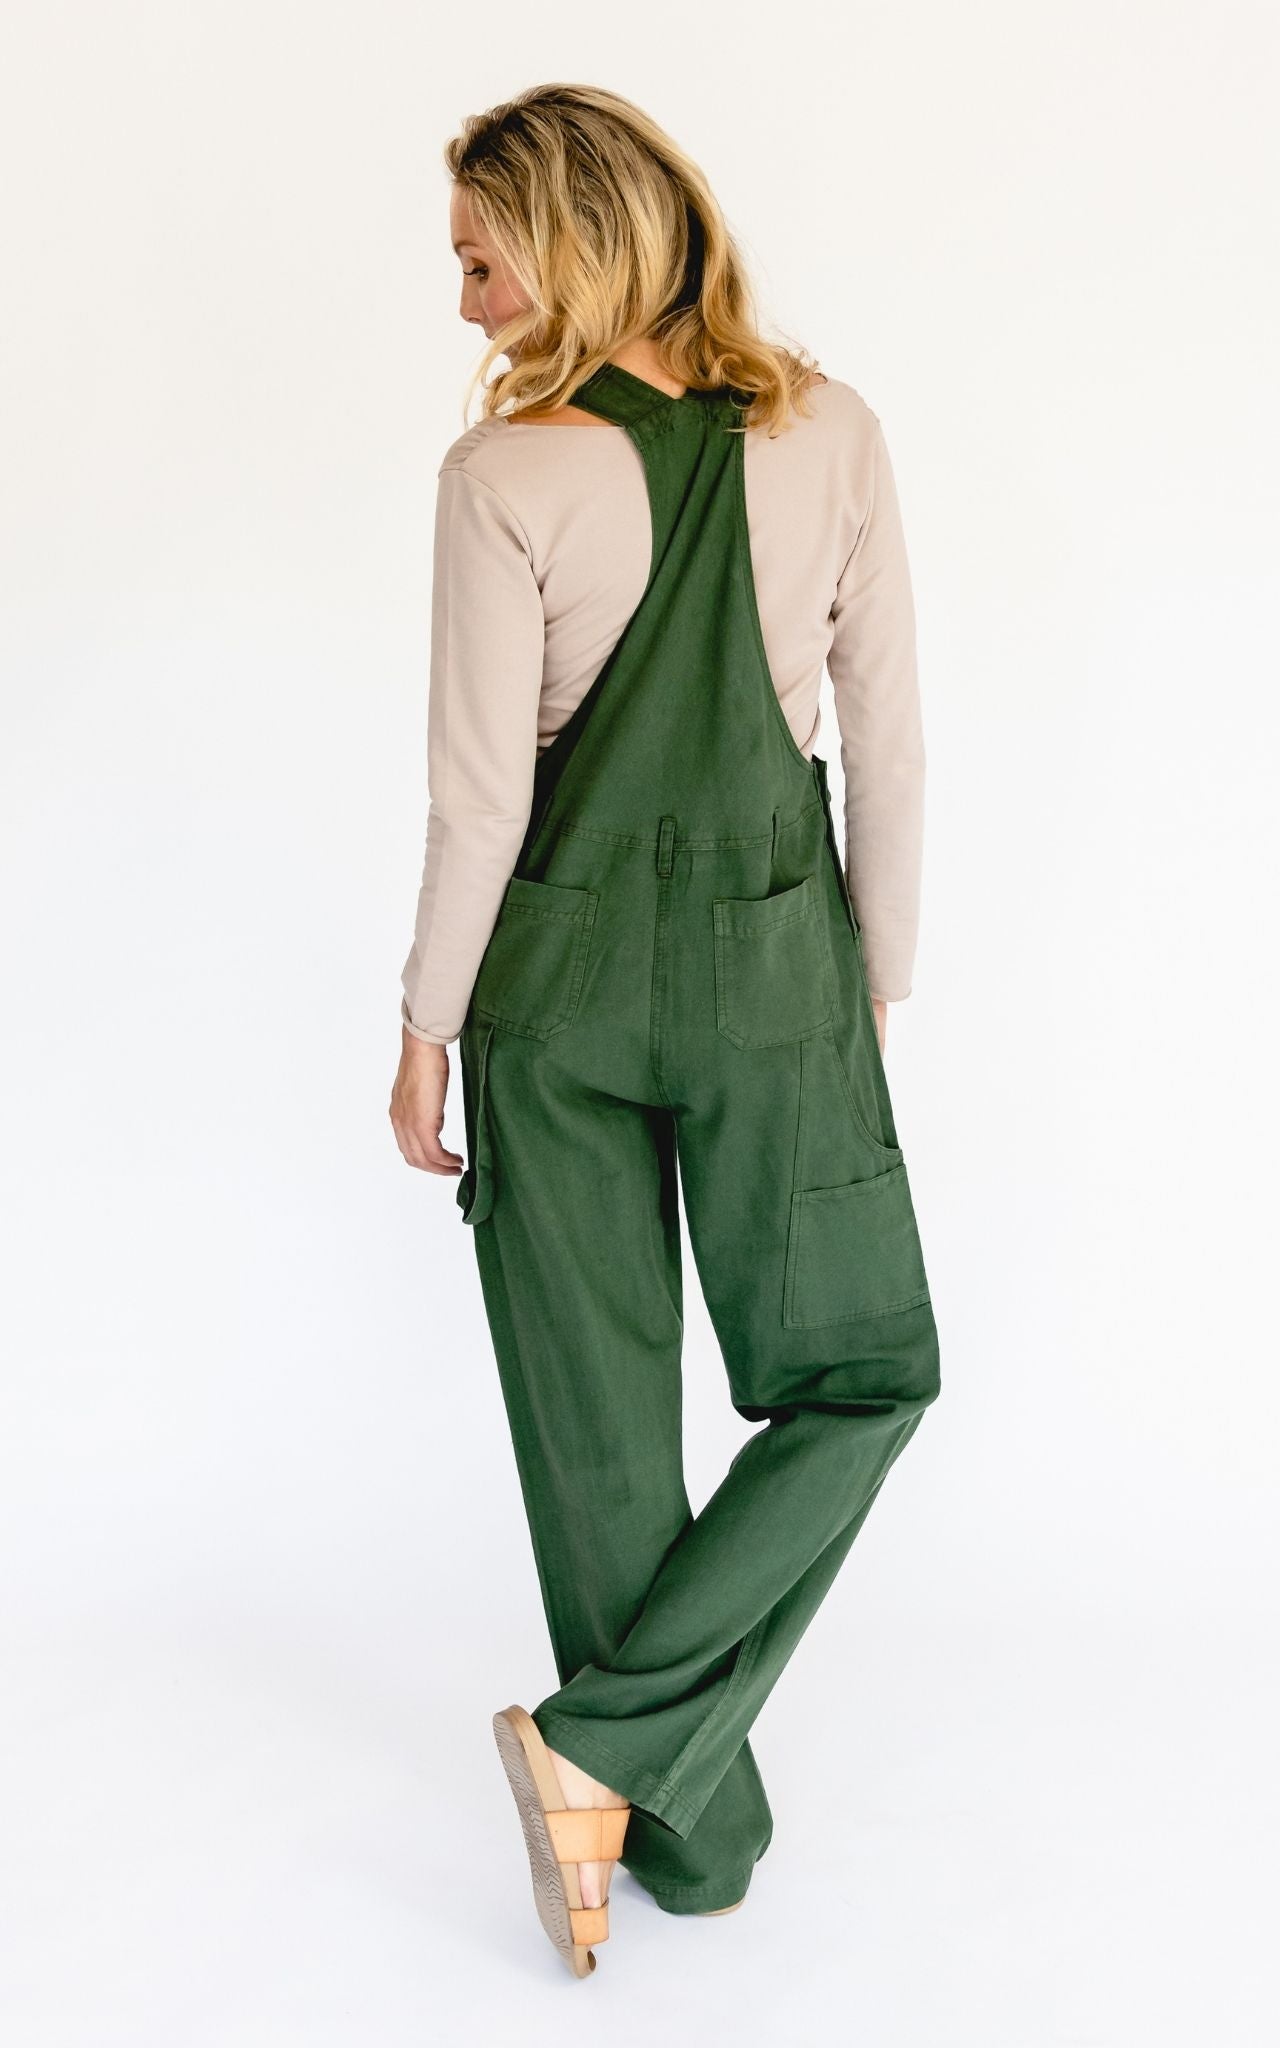 Surya Australia Ethical Cotton Straight Leg Overalls (Dungarees) from Nepal - Green